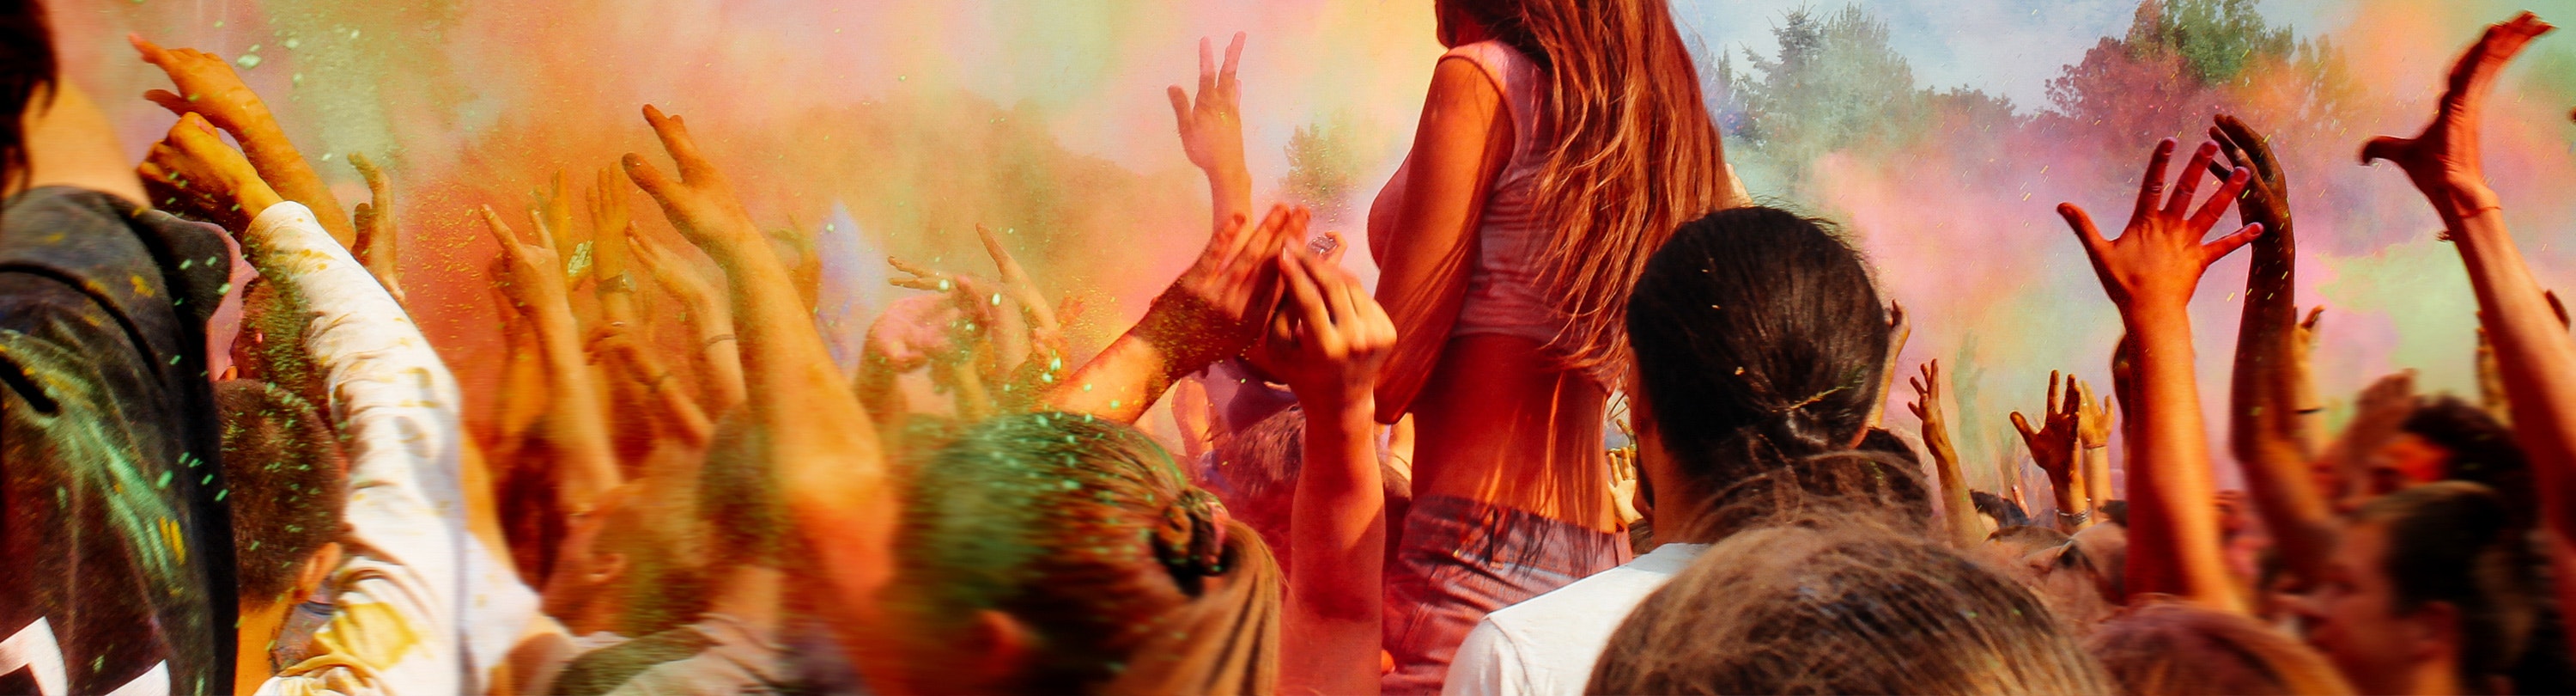 A crowd of the people with their hands in the air throwing colourful powder for Holi Festival